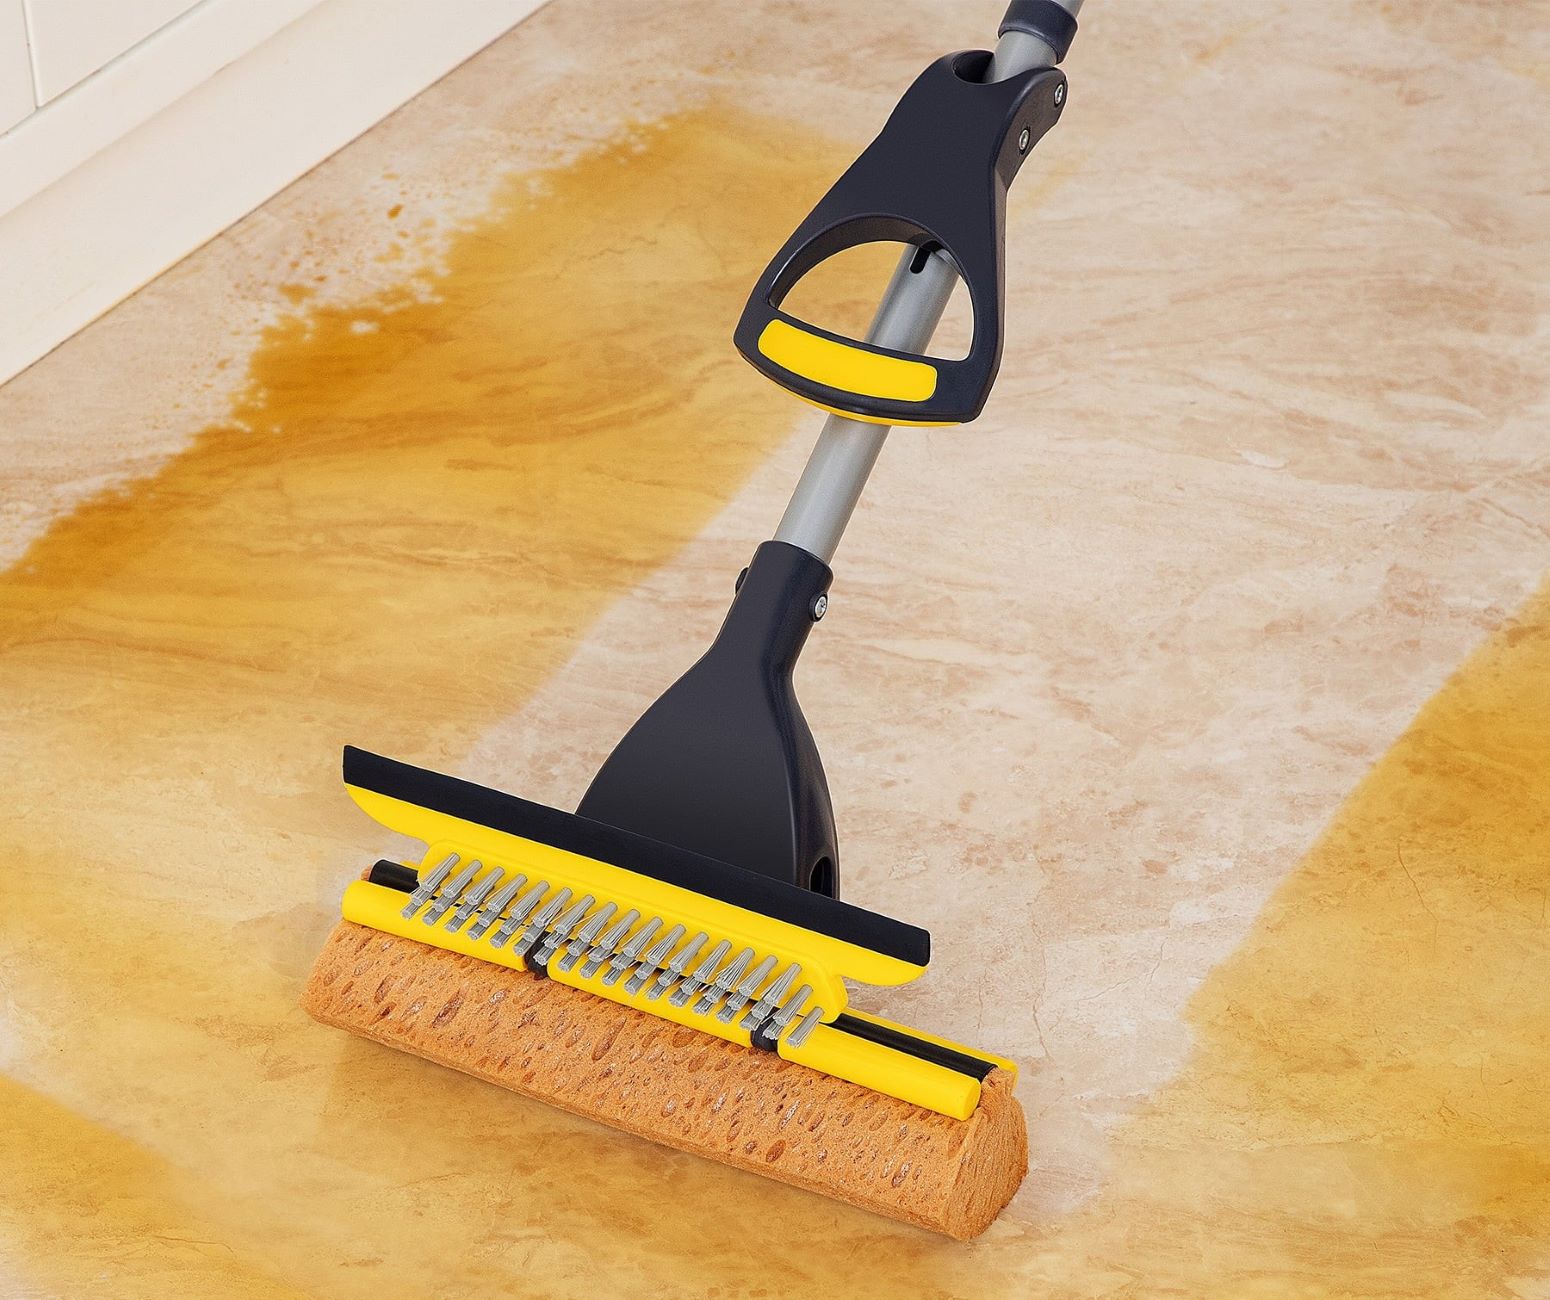 How To Clean A Sponge Mop